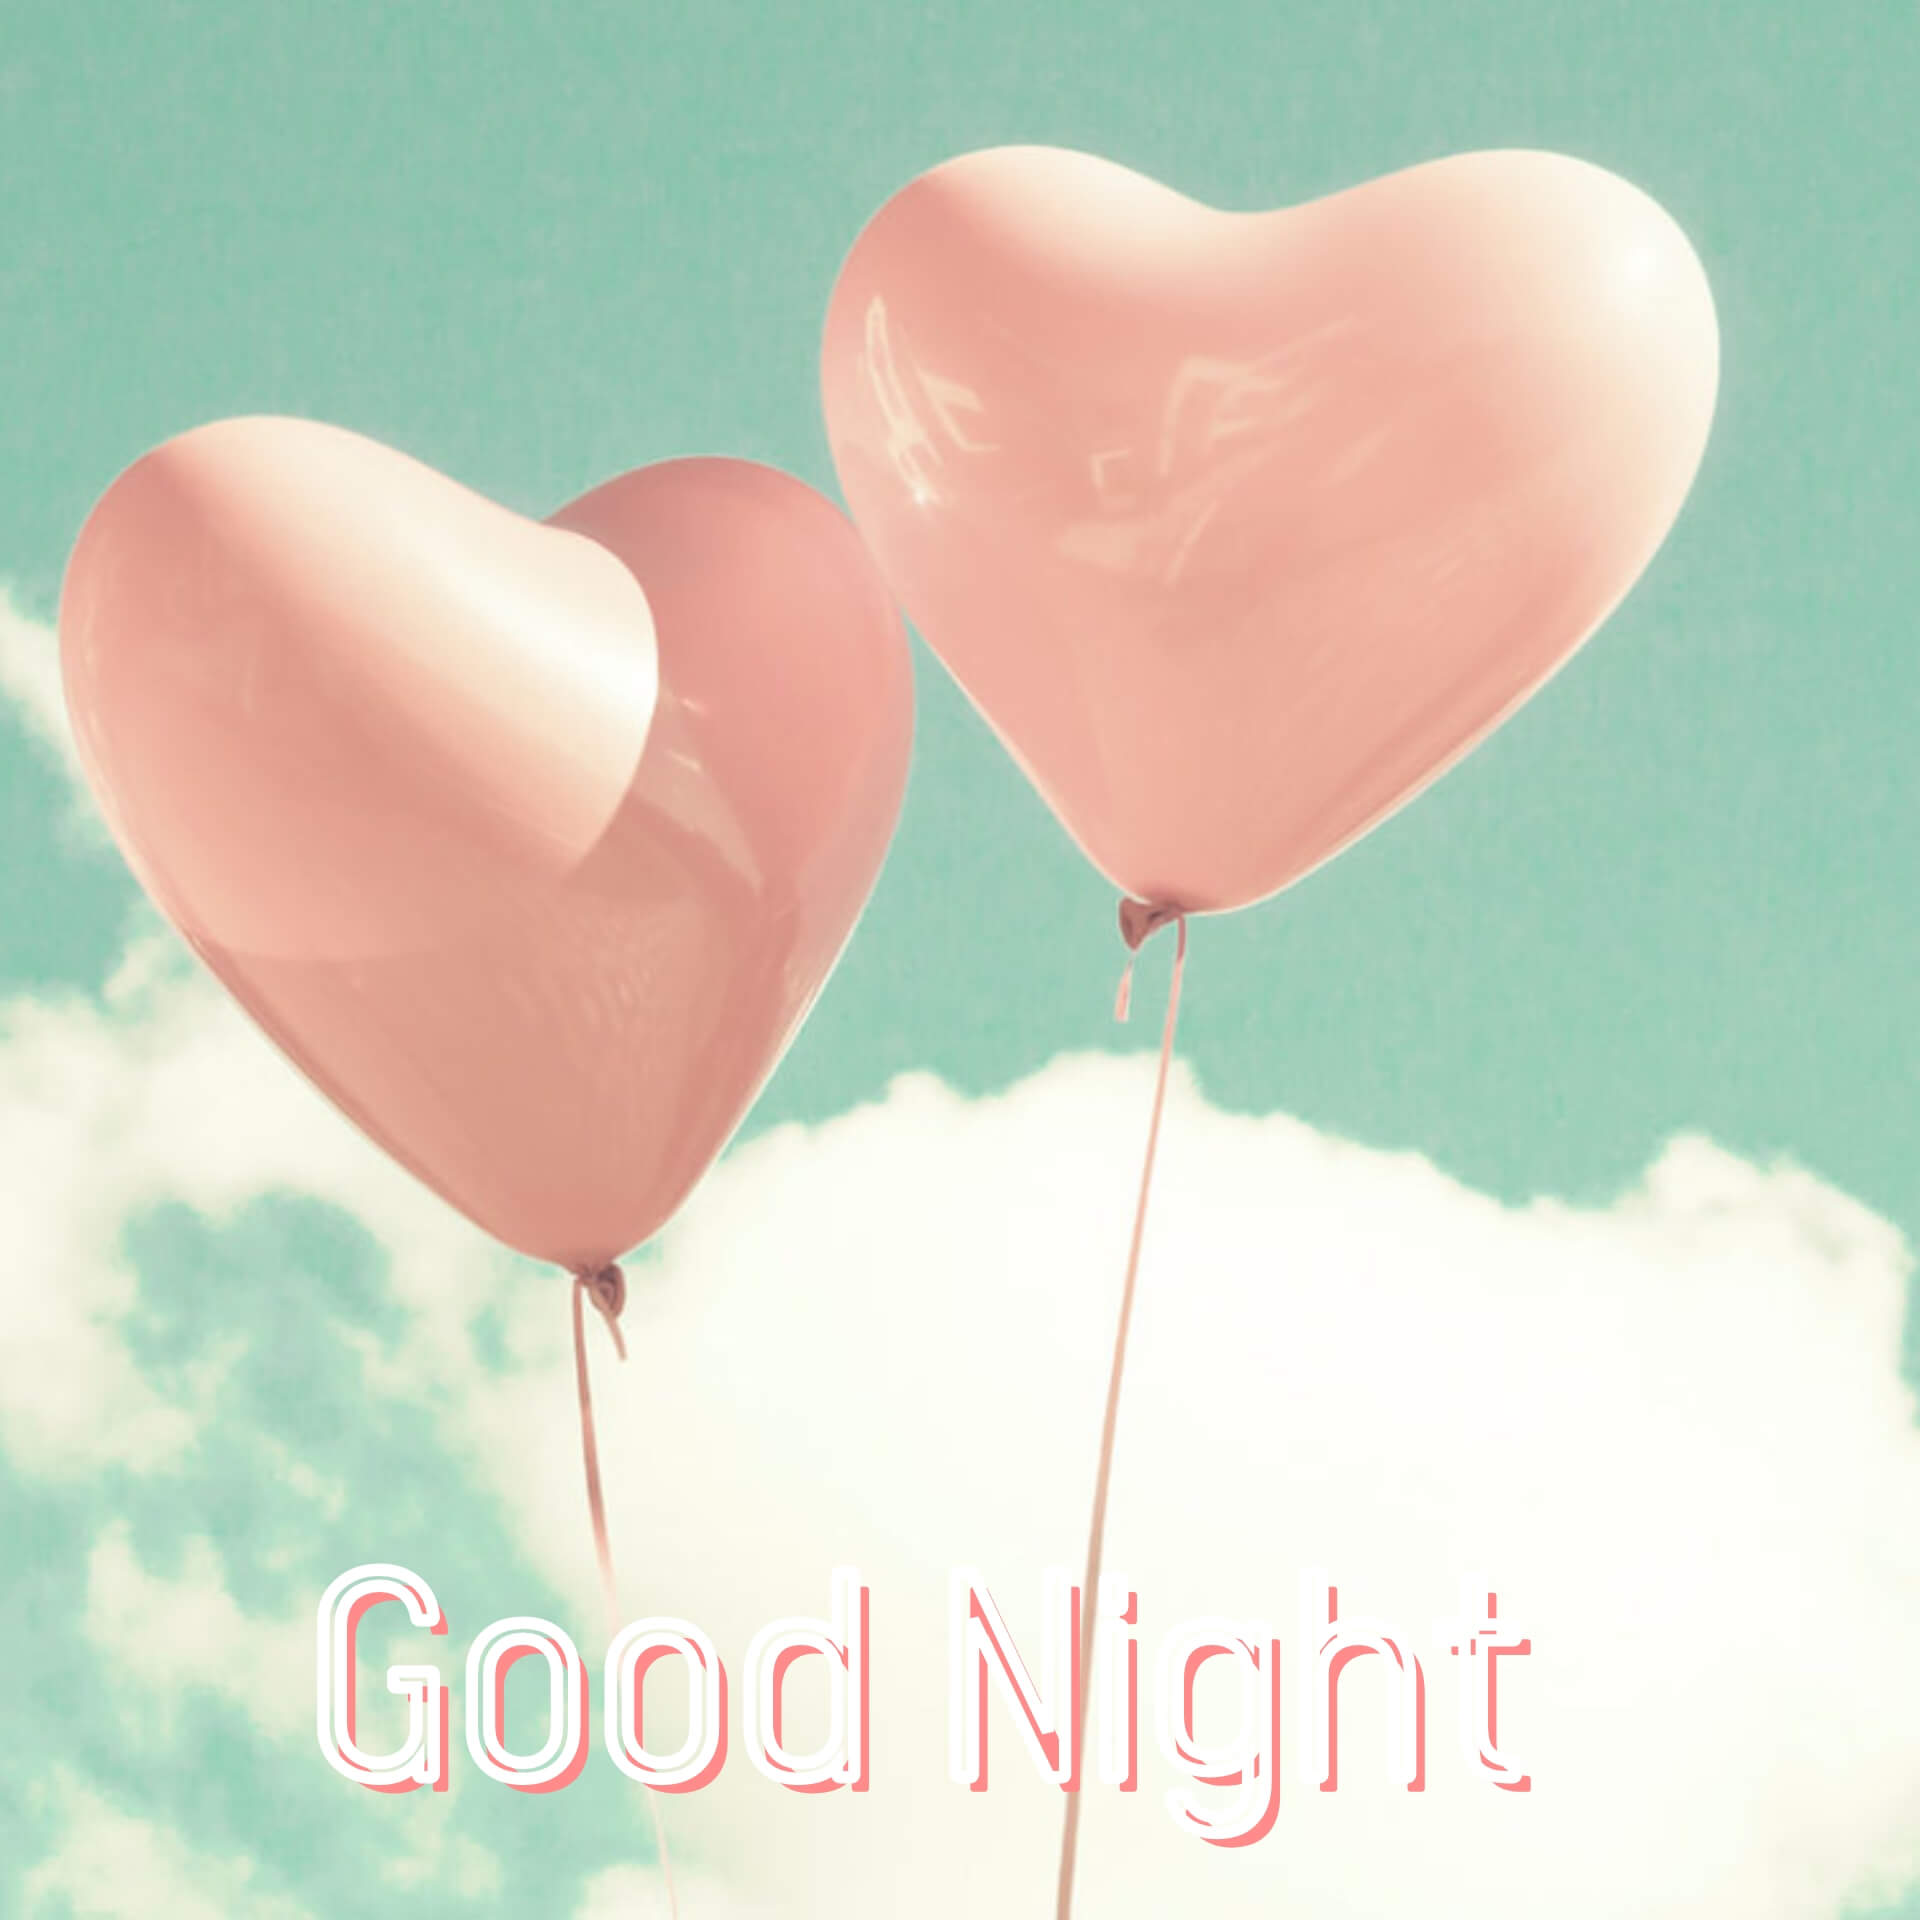 Good Night Images With Heart for GF